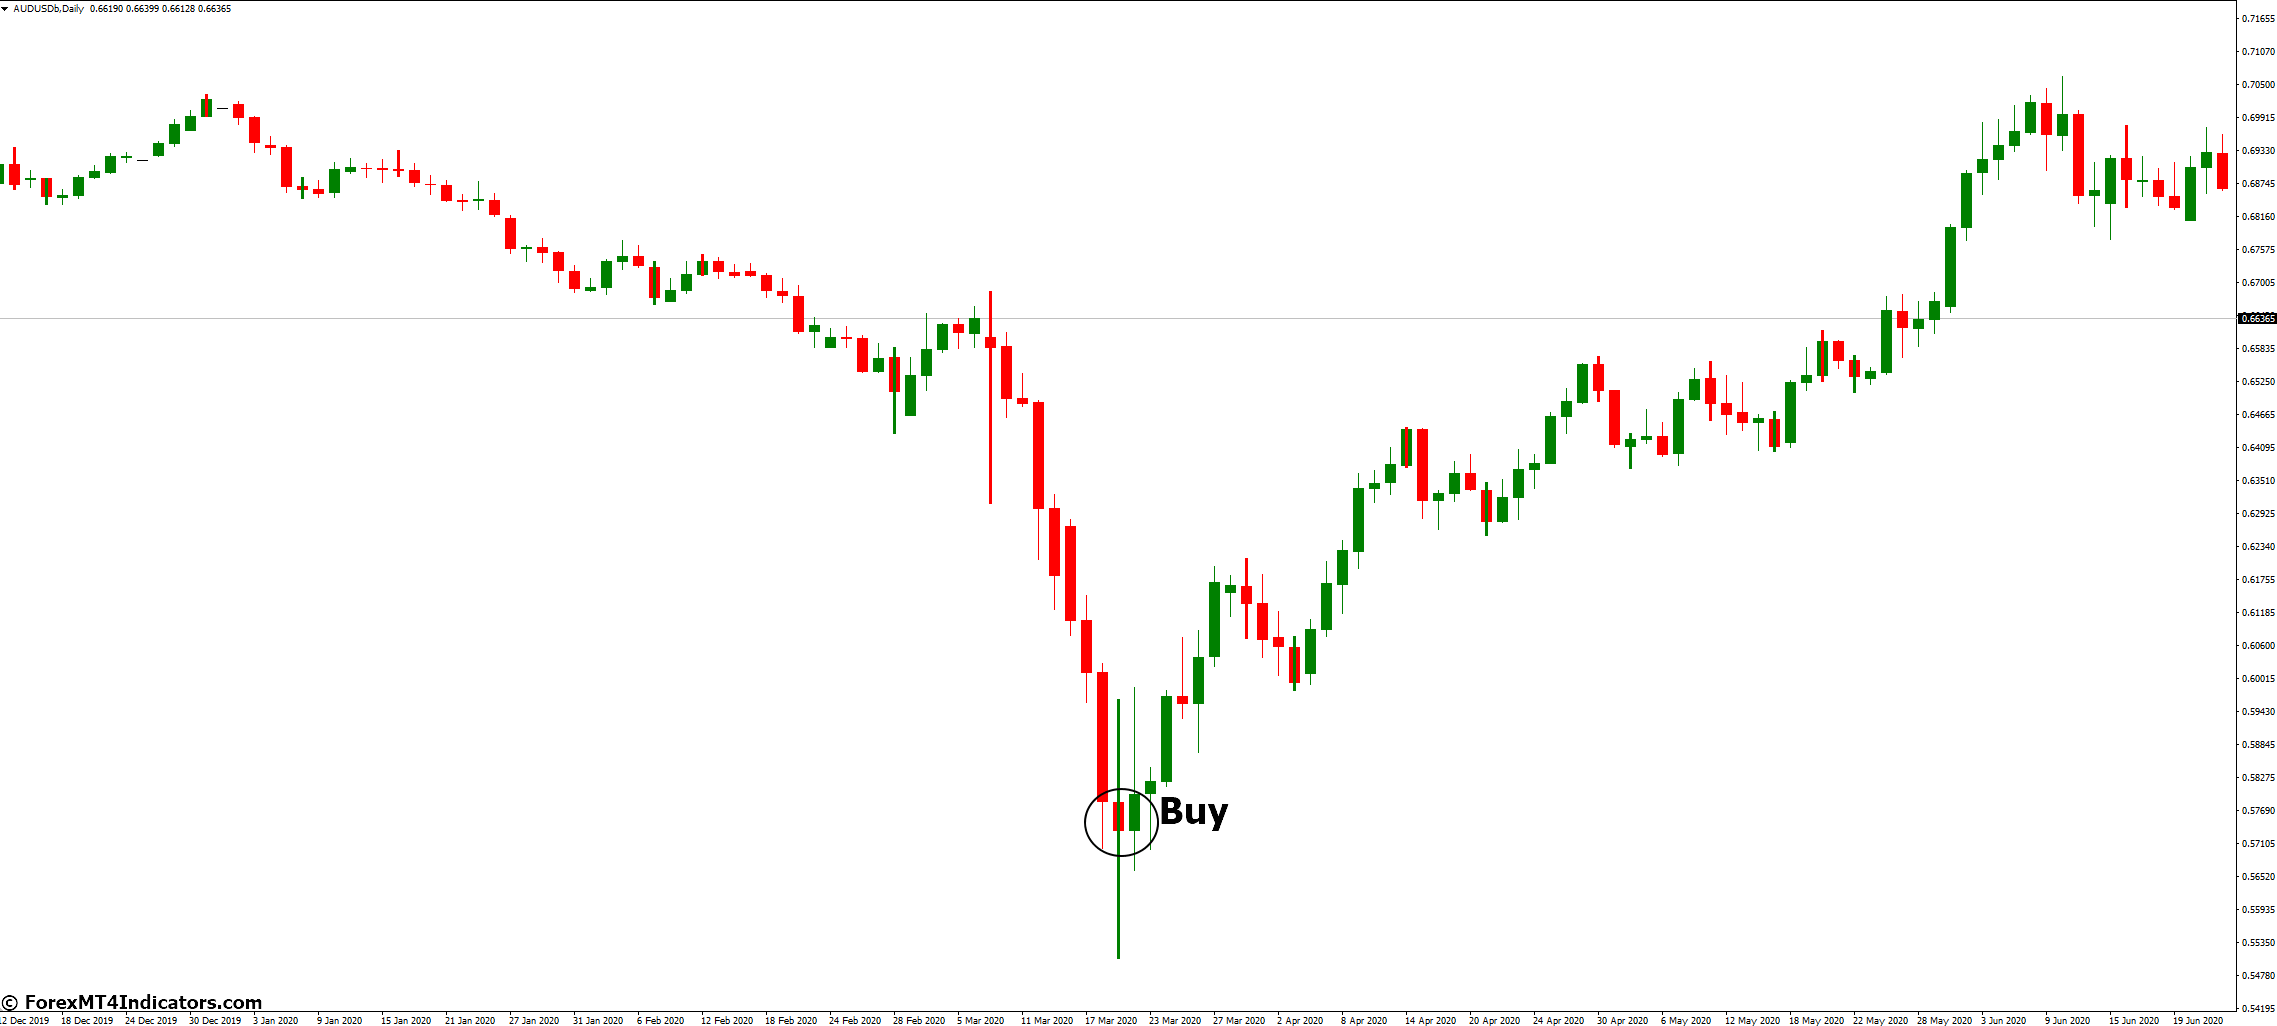 How to Trade with Reversal Bar Indicator - Buy Entry